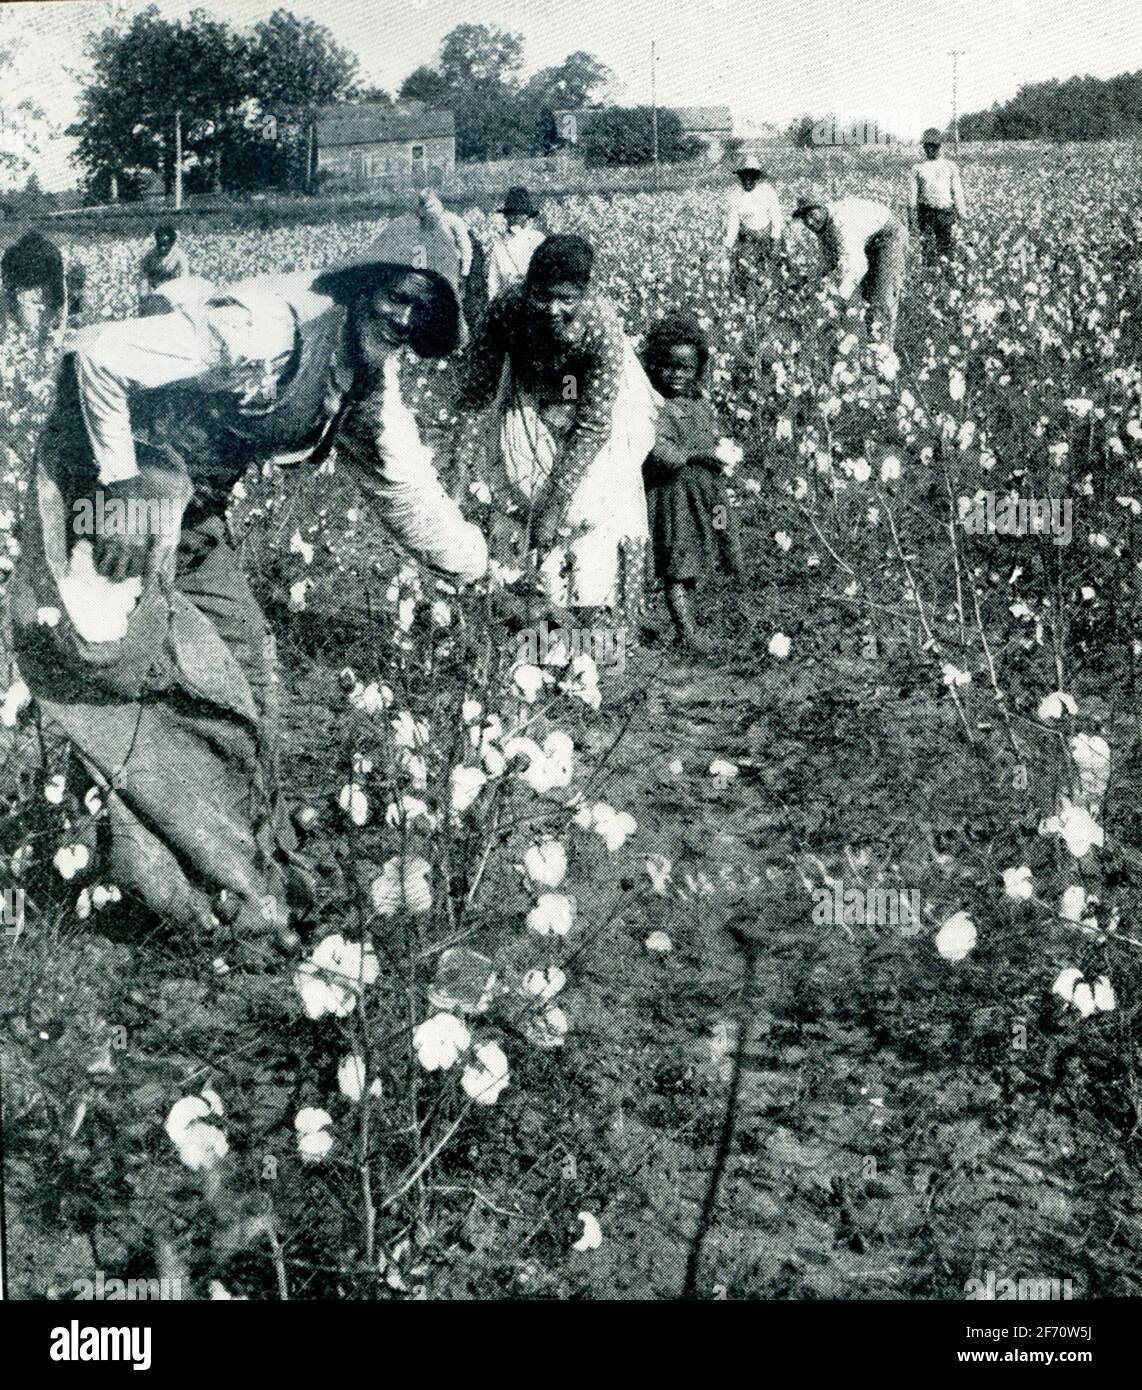 The photo dates to 1903. Picking Cotton in Mississippi. An American Tea Plantation—Pinehurst Tea plantation in Summerville, South Carolina, which was started in 1888 by Charles Shepard. Stock Photo